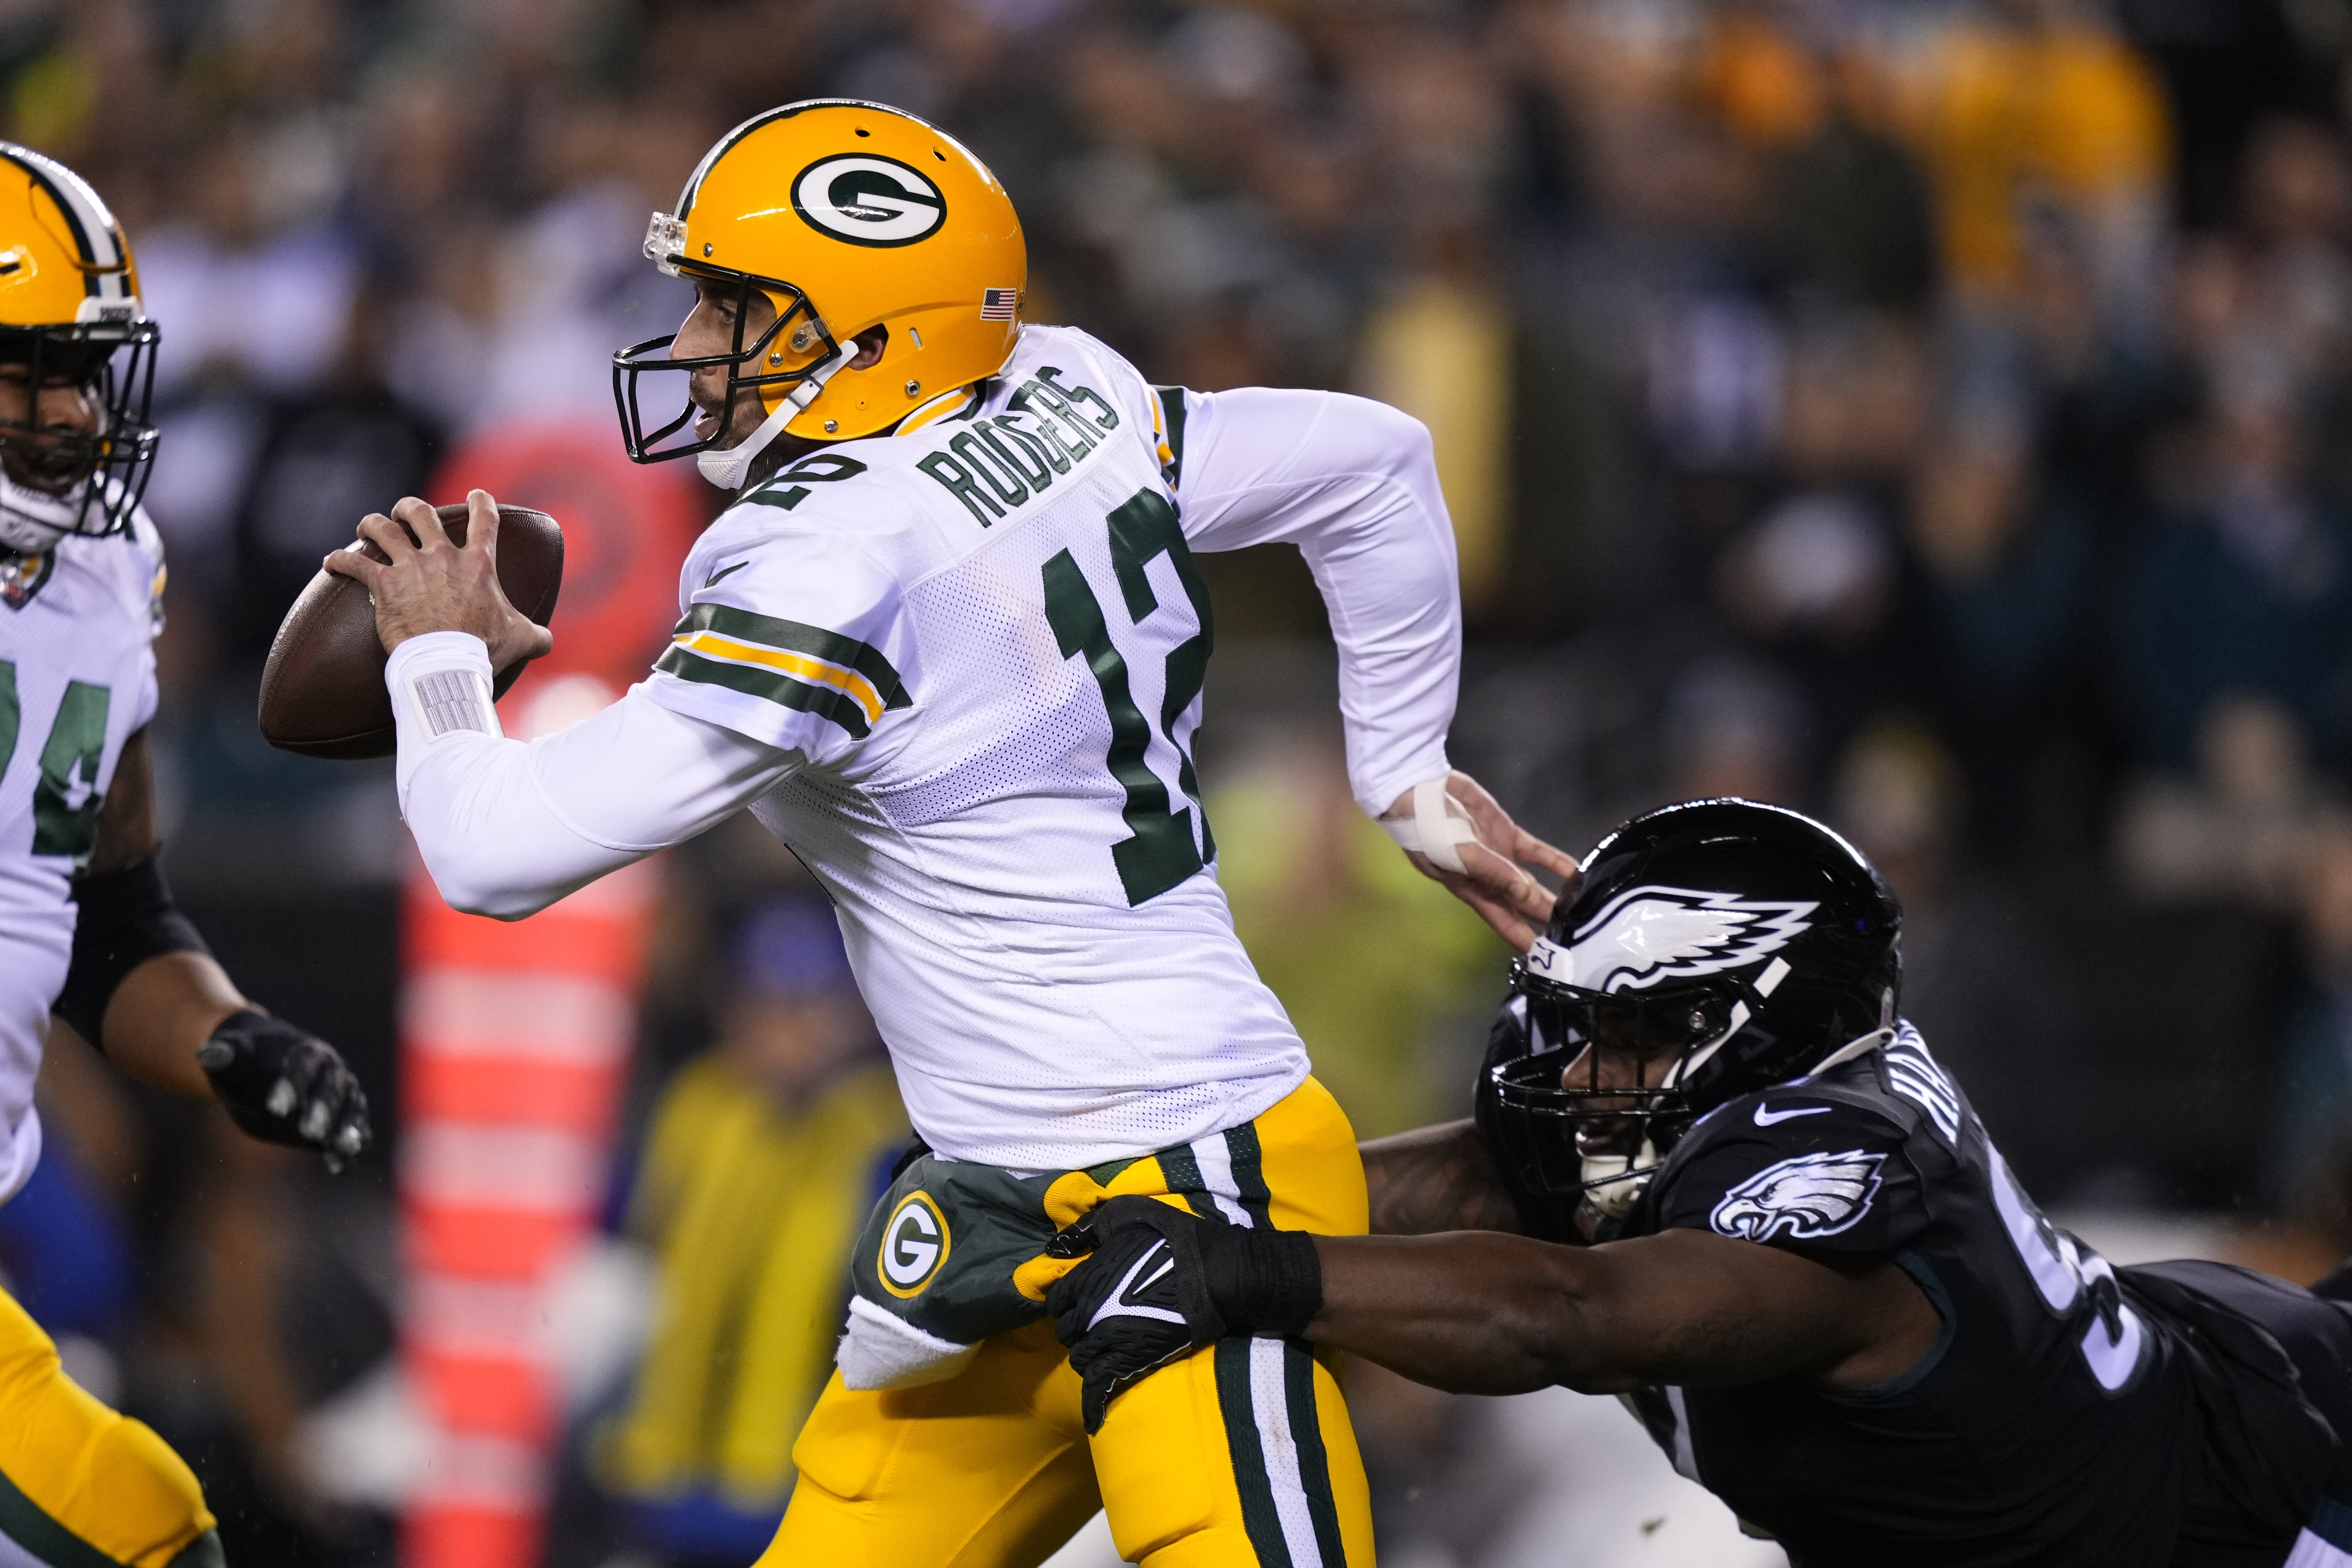 Packers caught in tailspin ever since London trip